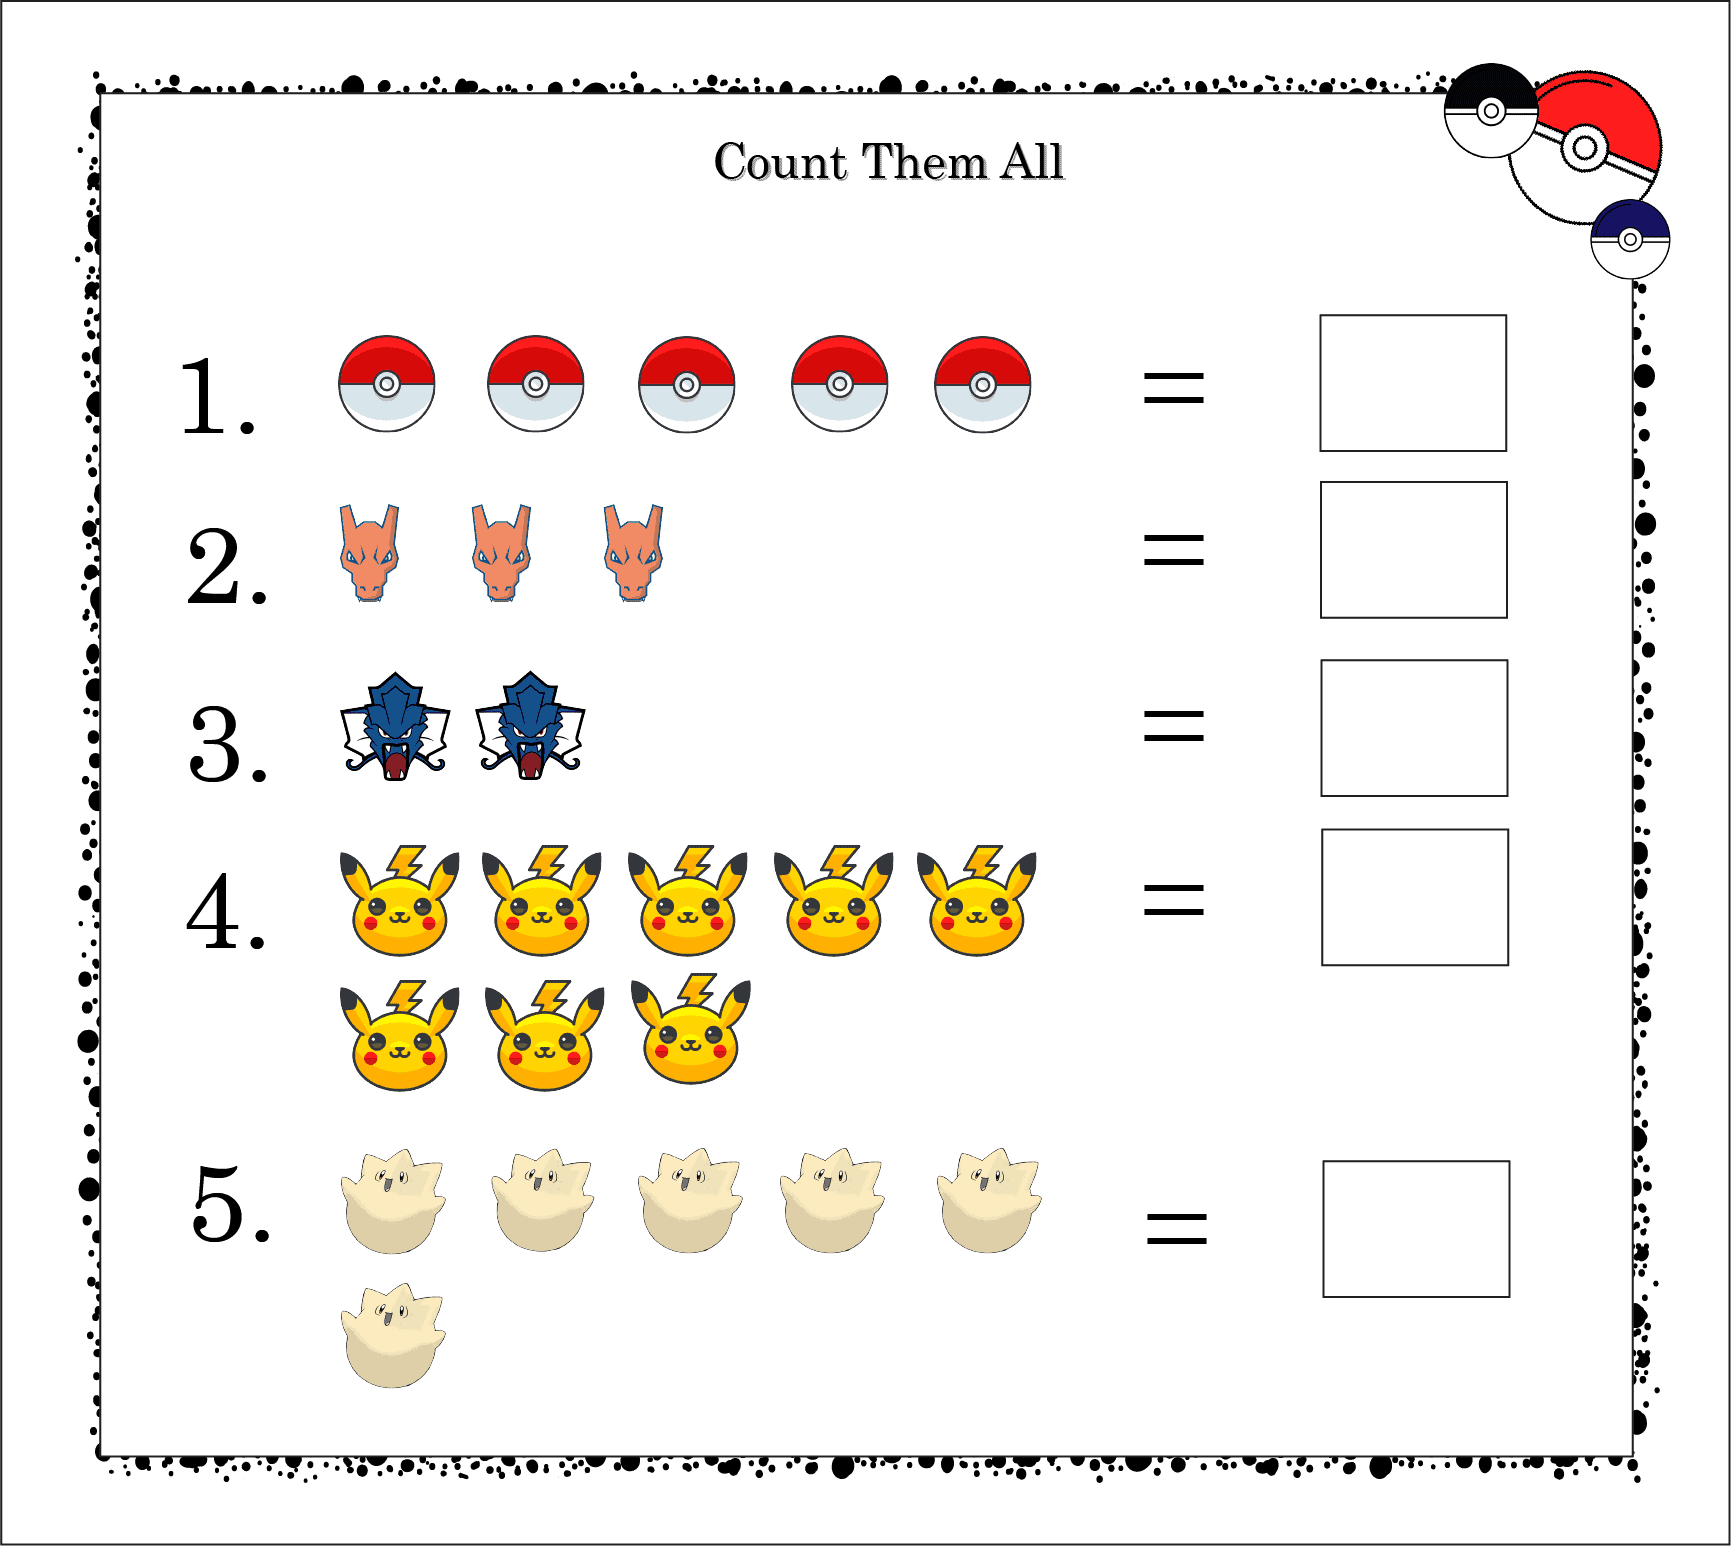 Counting Pokemons and Pokemon Items